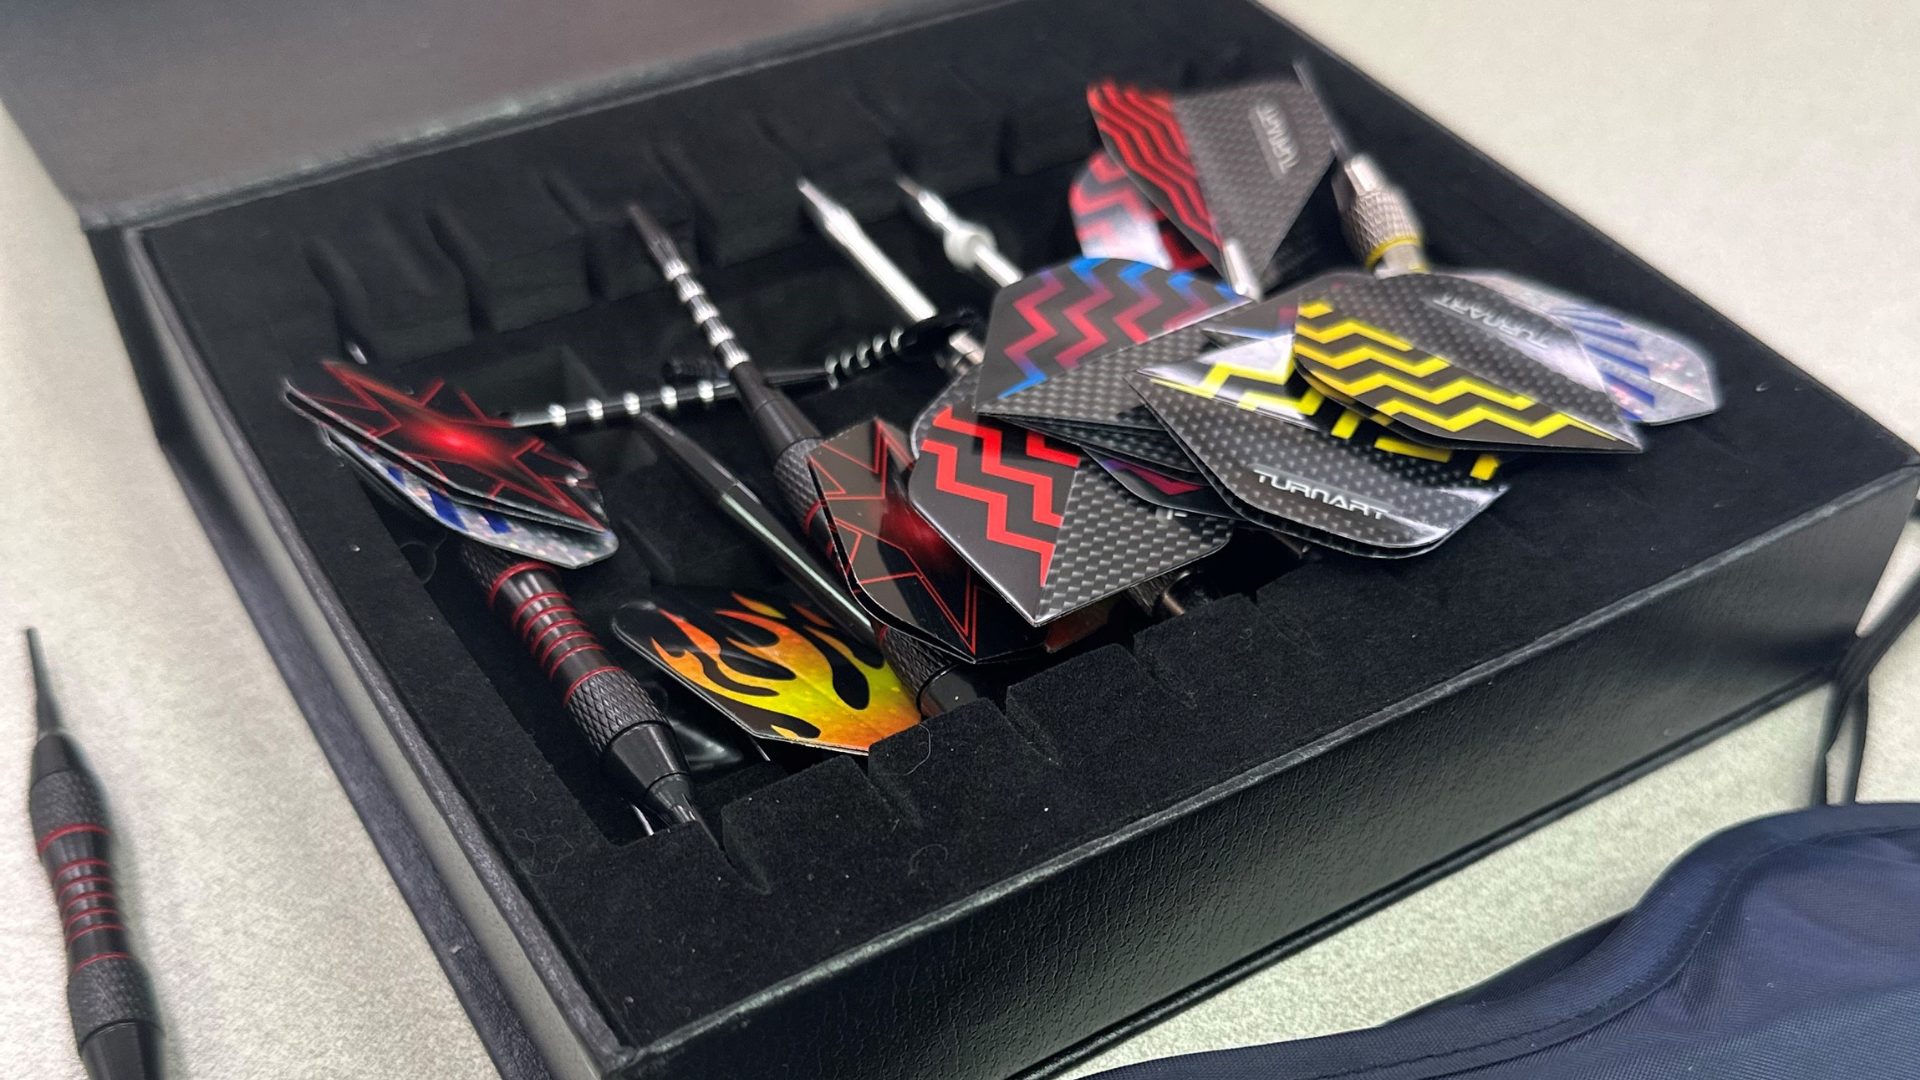 Image Shows a Box Full of Darts. The Flights have Flame Designs & Patterns. Many Darts inside a Bacl Box with Blindfold Tucked in Corner. Part of George's Collection of Darts.